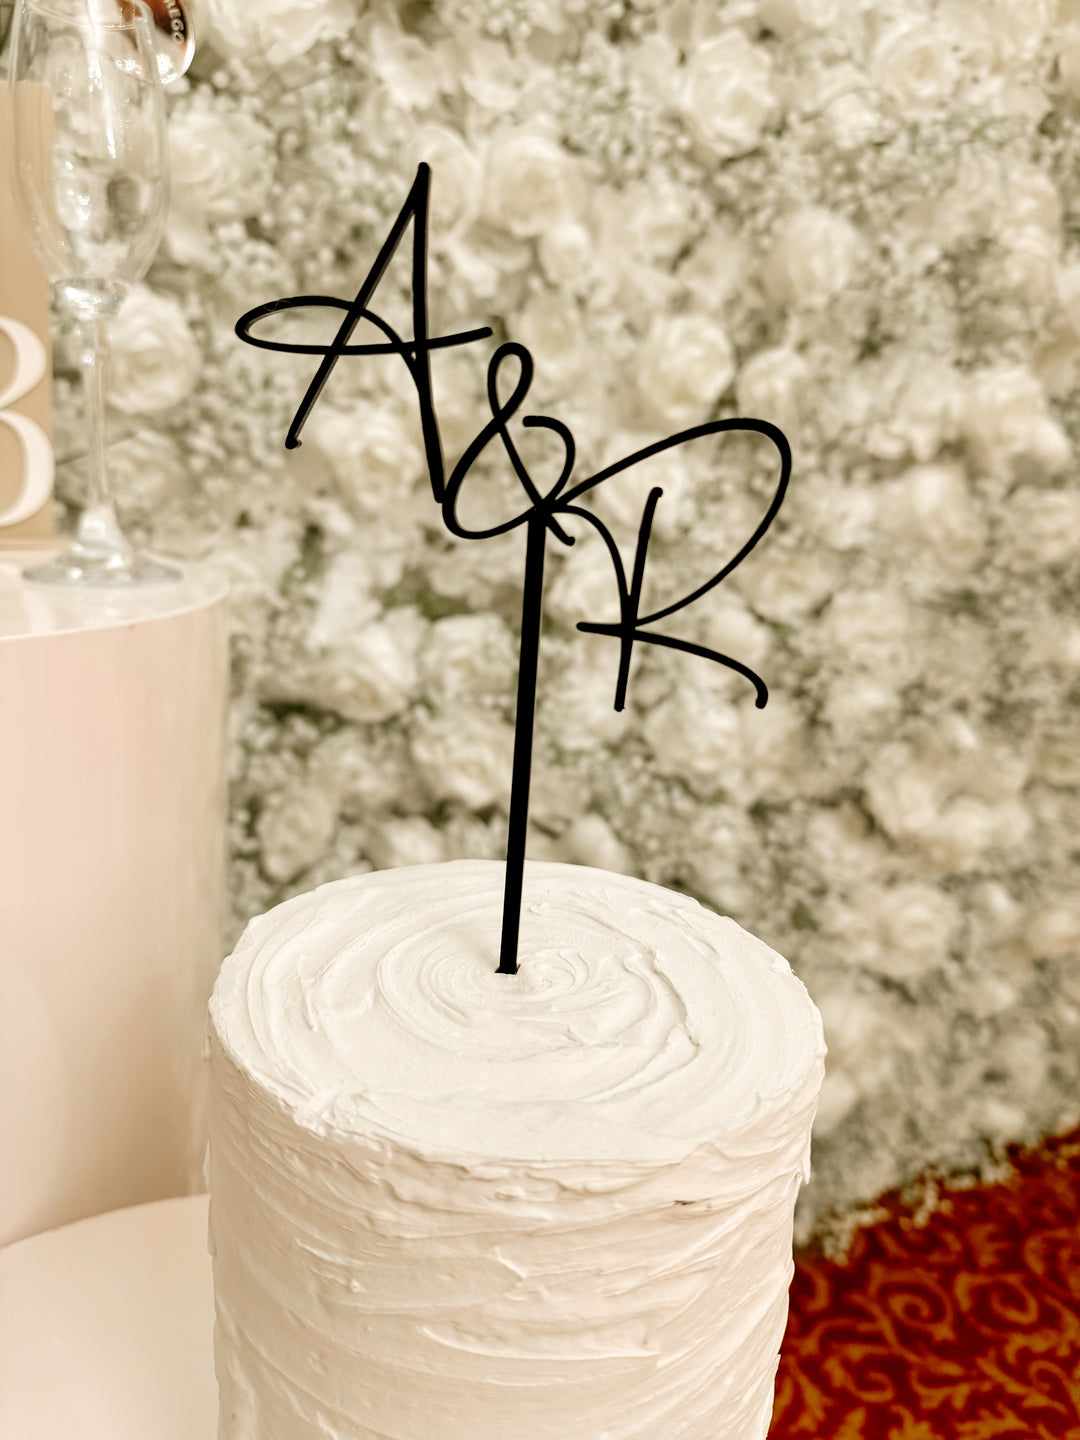 Cake Topper - Initials - Style 1